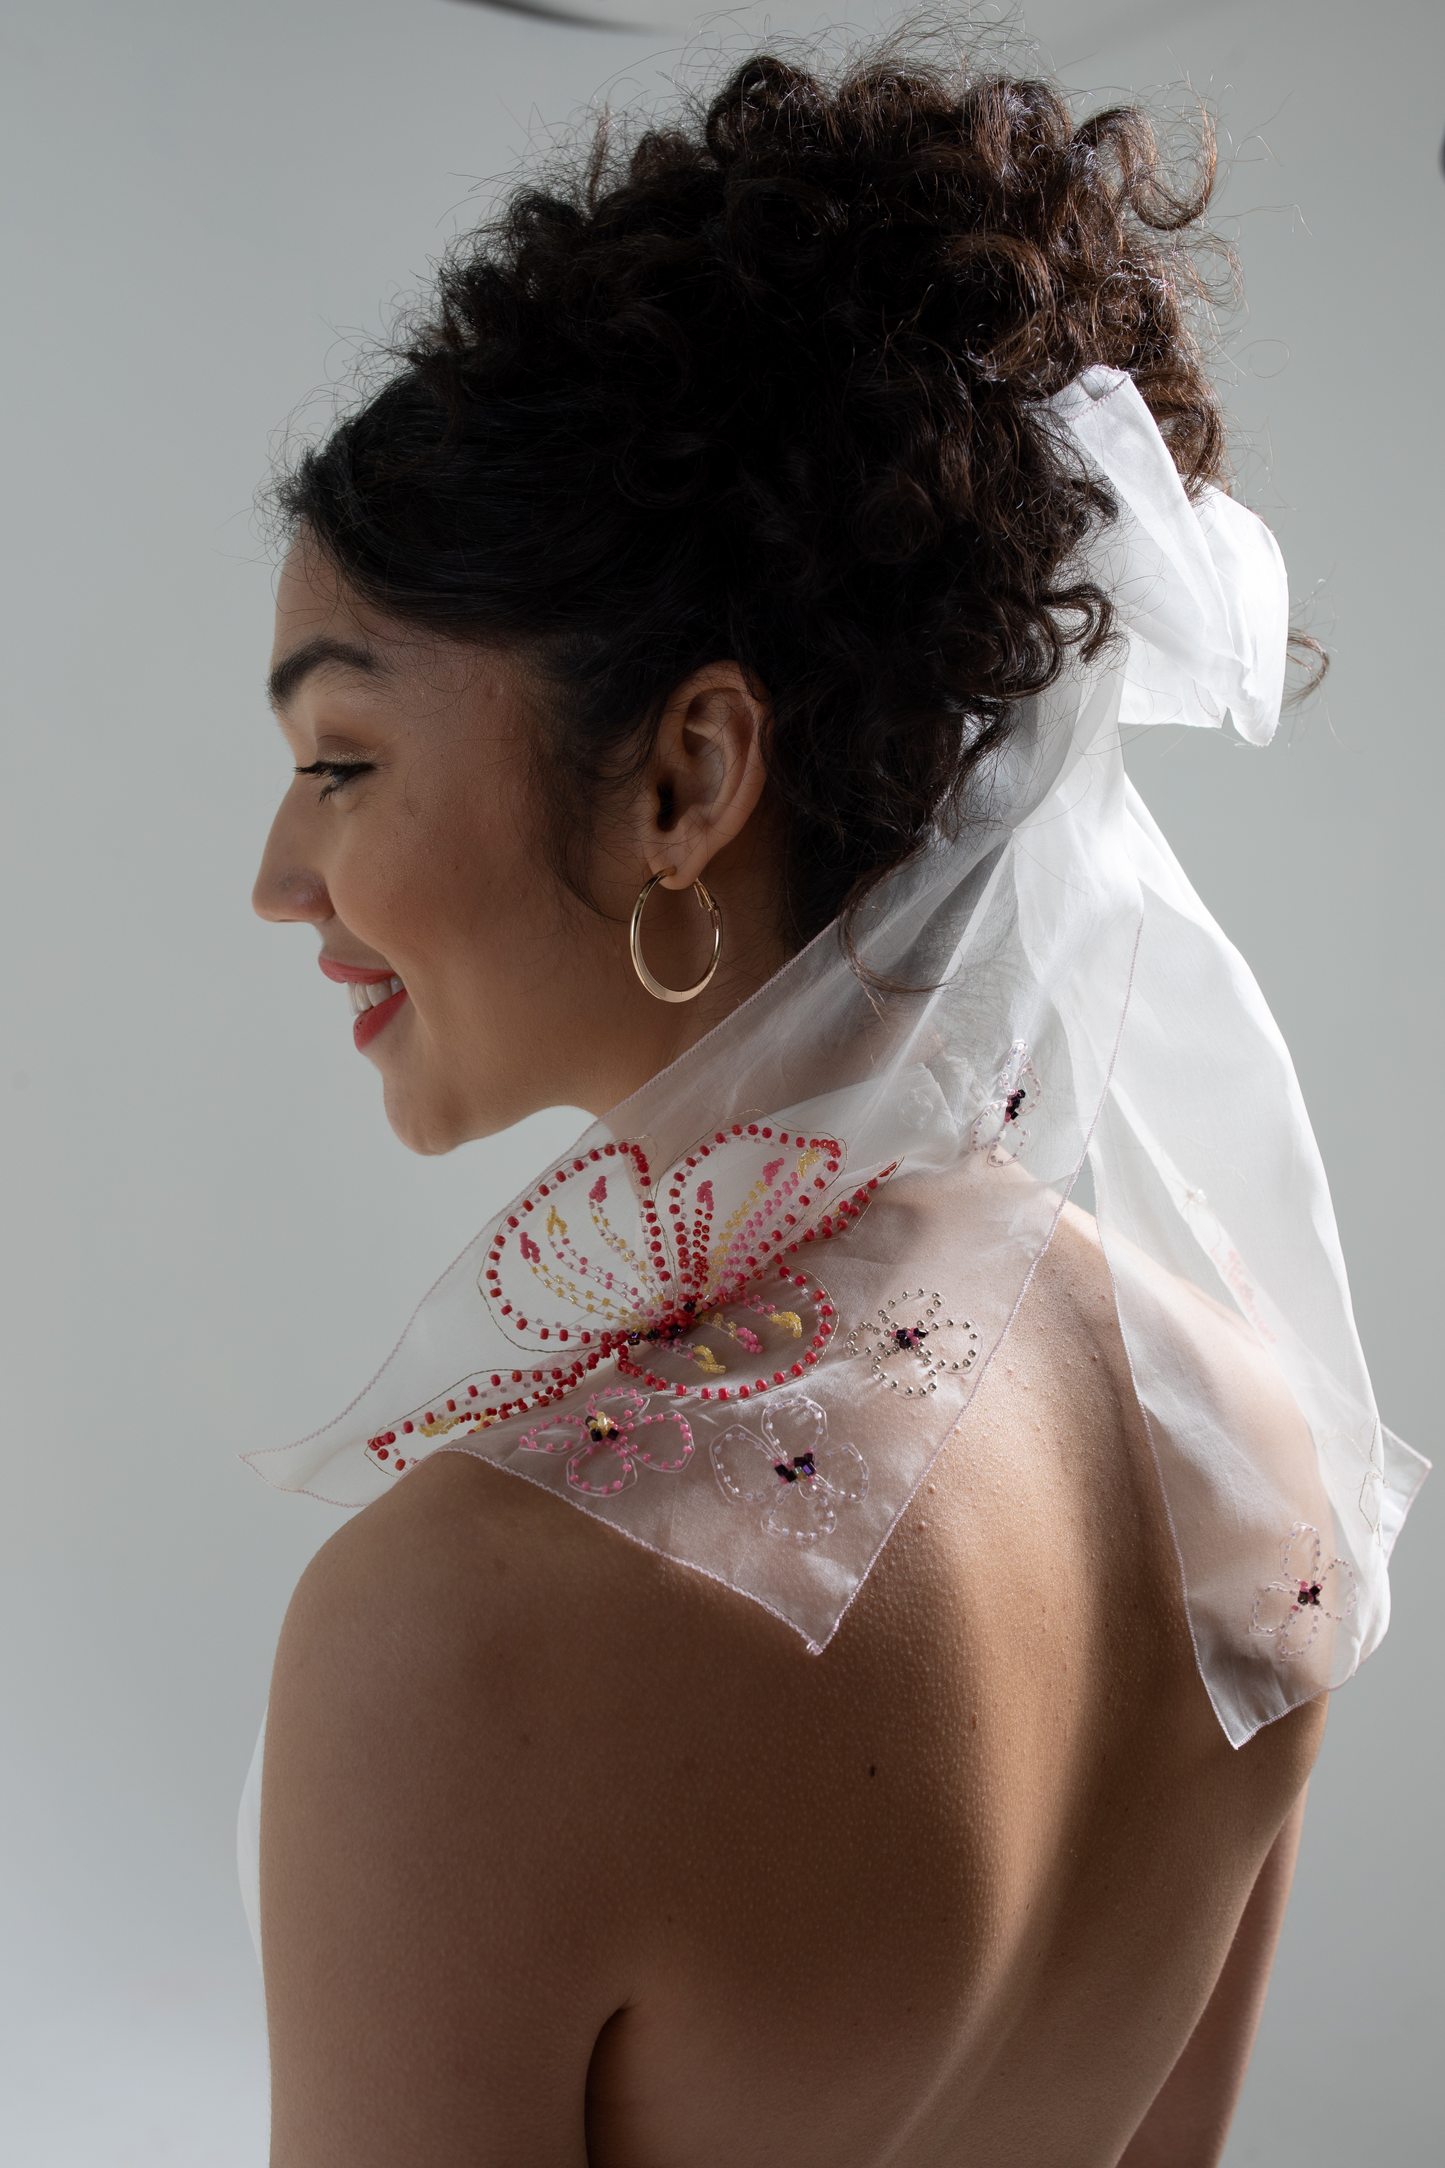 silk organza hand embroidered bow veil decorated with a hand beaded floral design, this bridal bow is part of a collection of luxury hand-embroidered bridal accessories, bridal headwear and veils